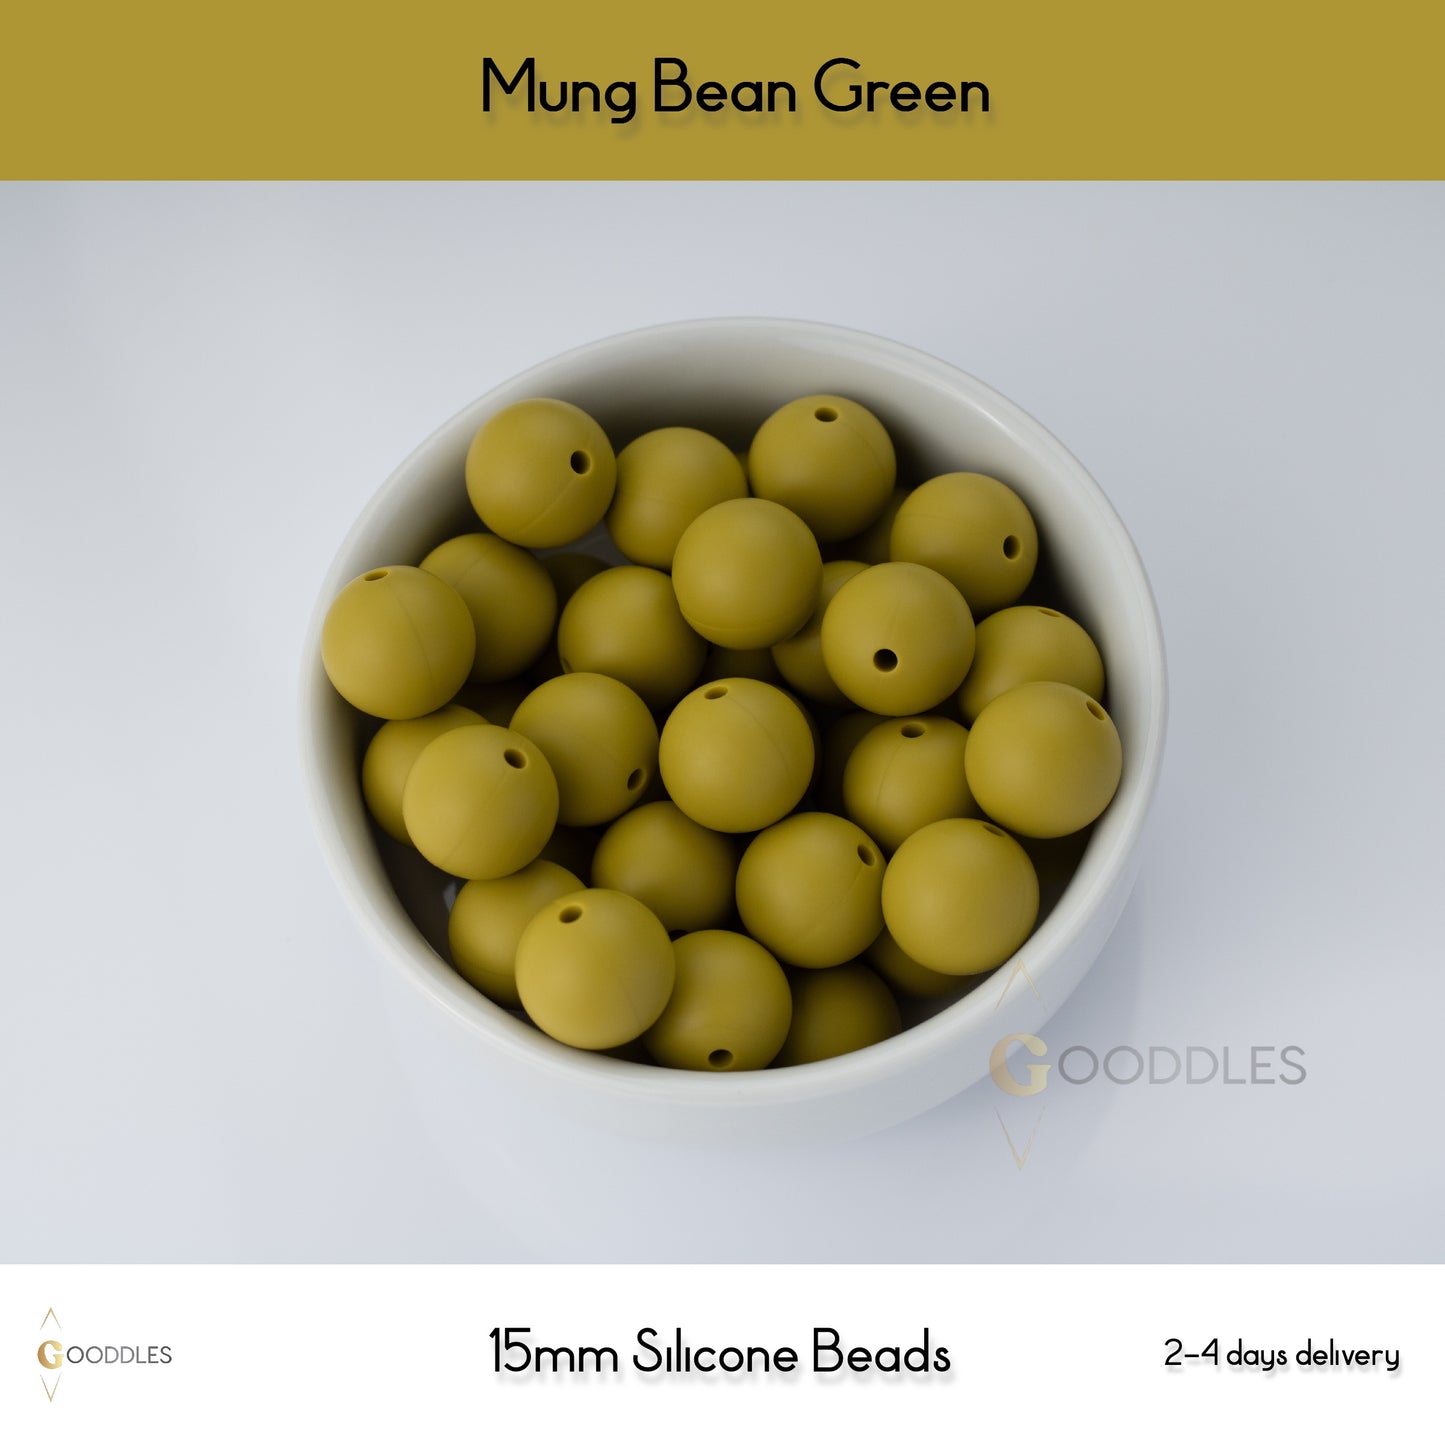 5pcs, Mung Bean Green Silicone Beads Round Silicone Beads